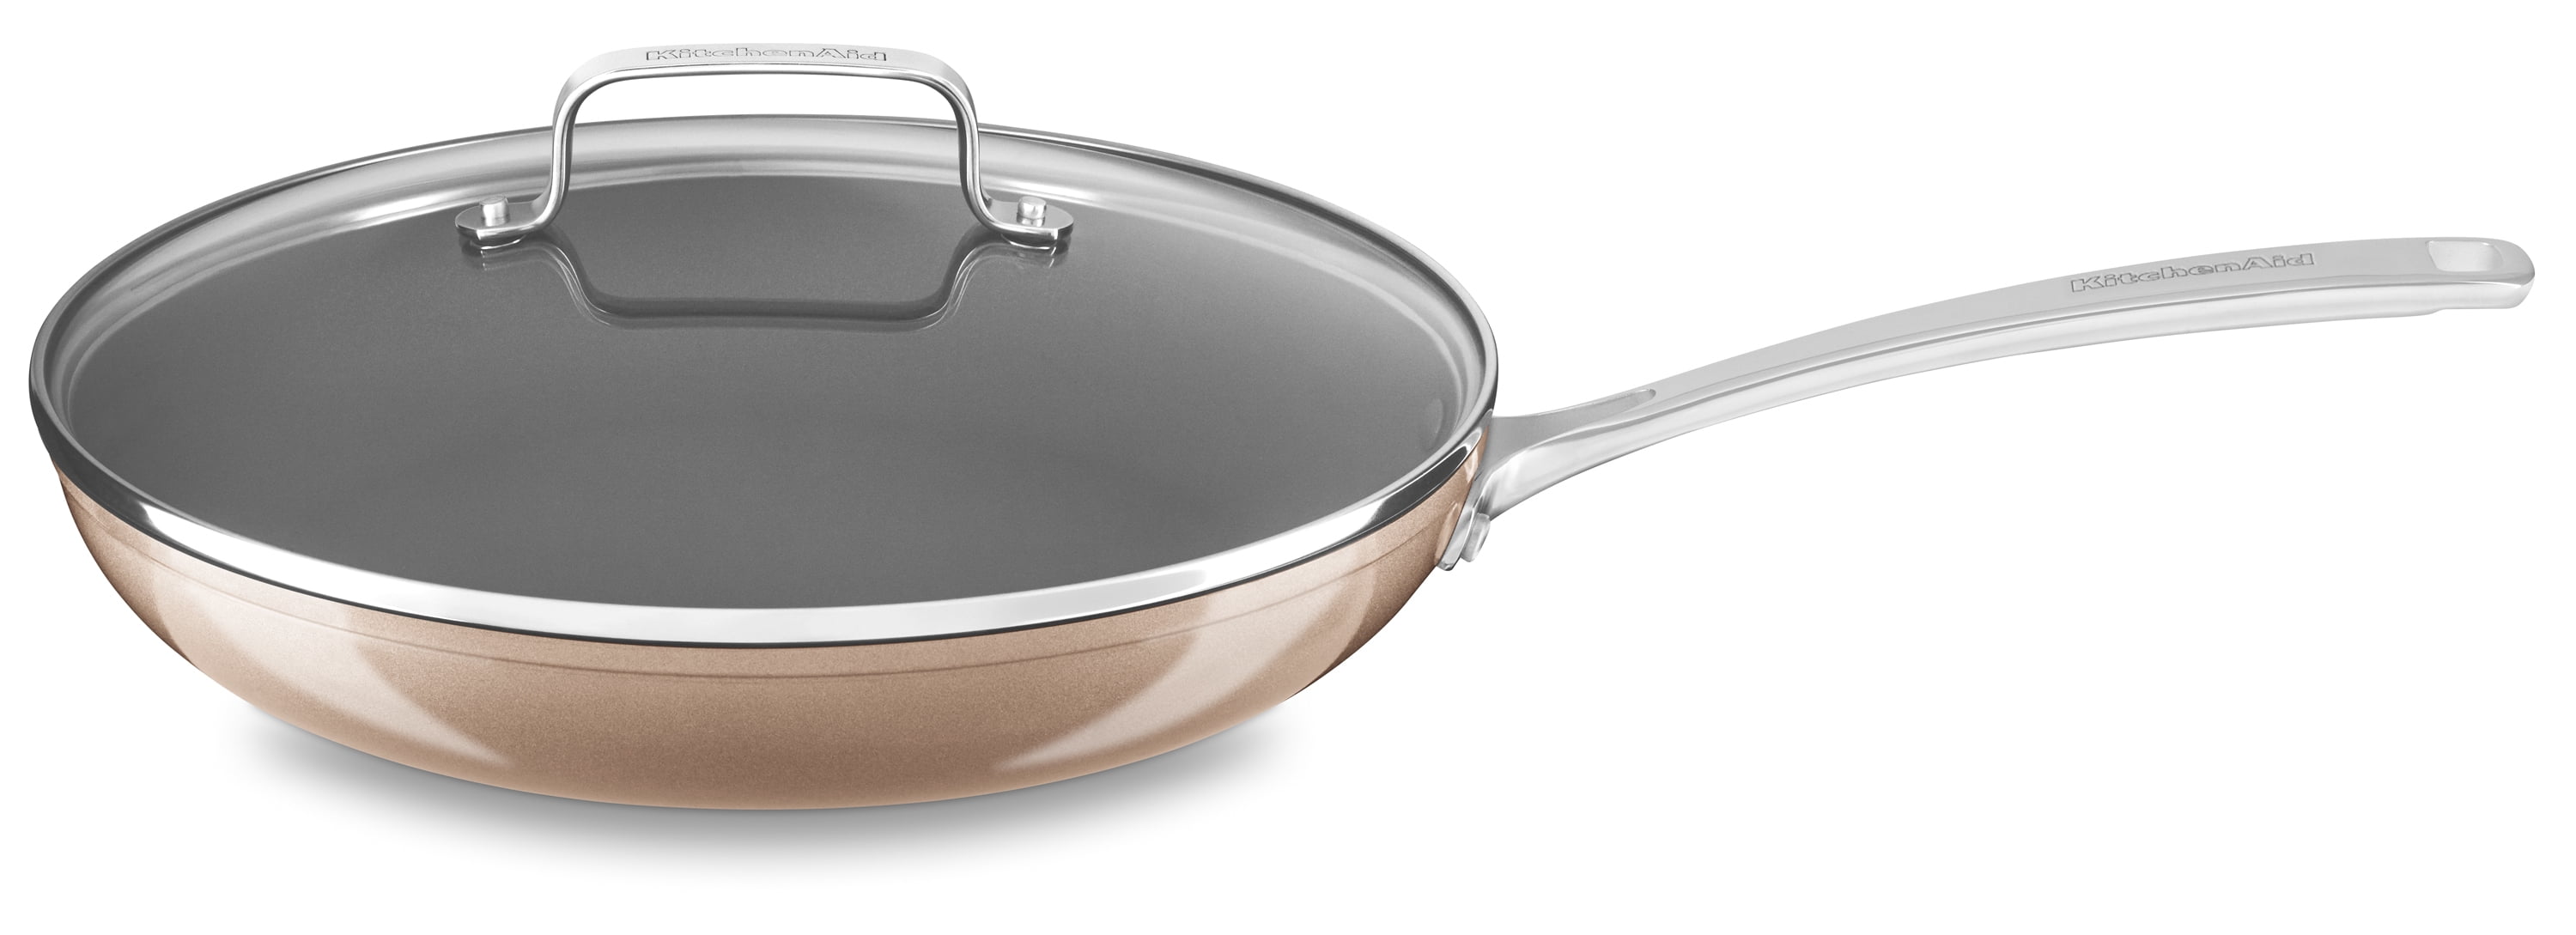 Kitchenaid Hard Anodized Nonstick 12 Skillet With Glass Lid, Toffee  Delight (Kc3H112Kltz)